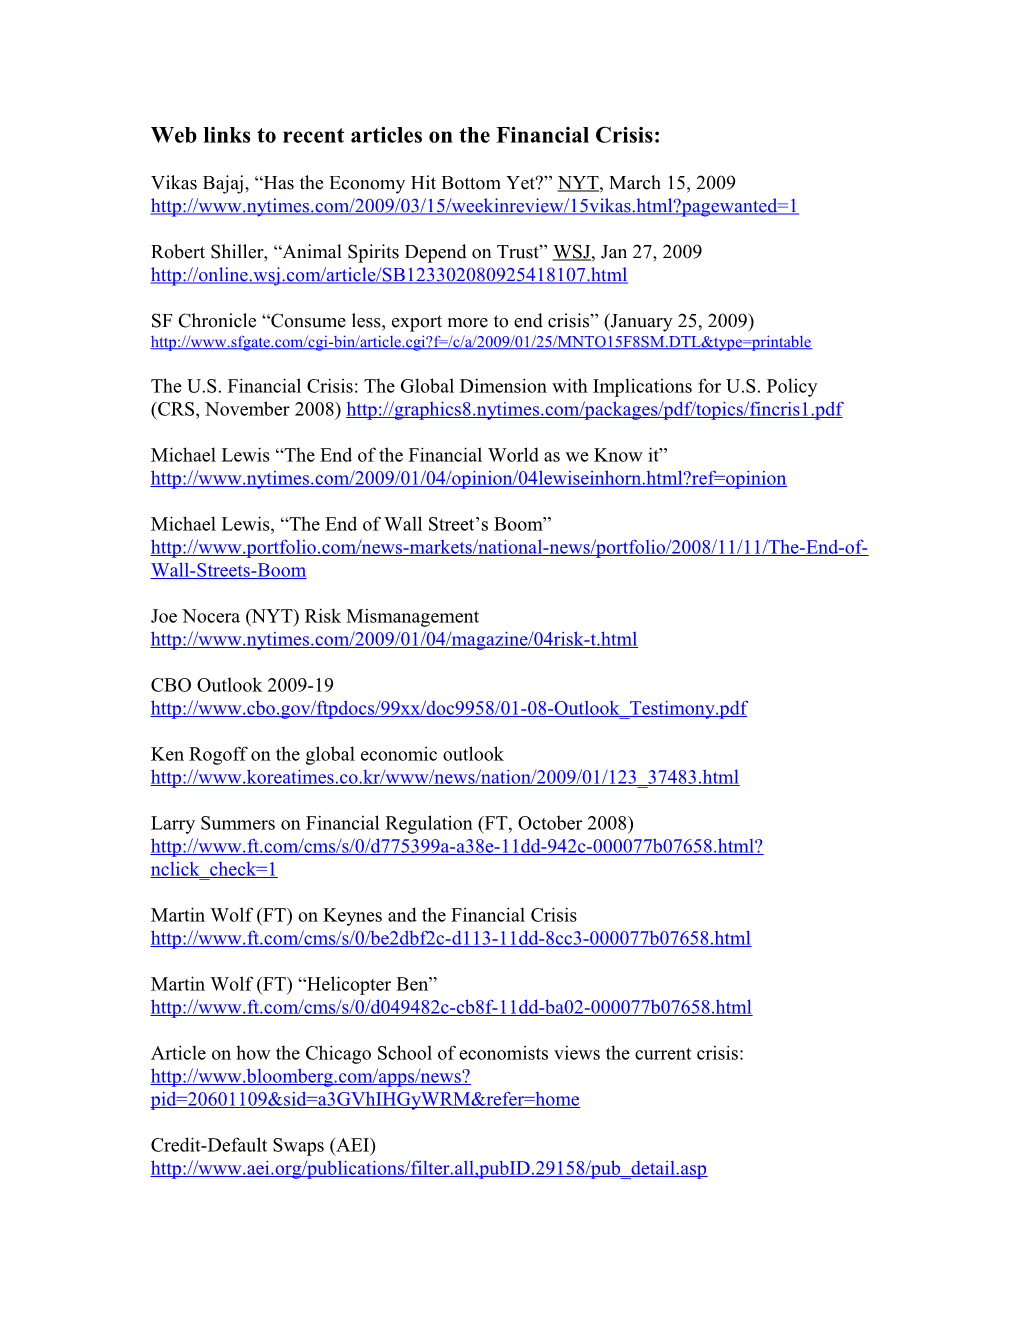 Web Links to Papers on the Financial Crisis